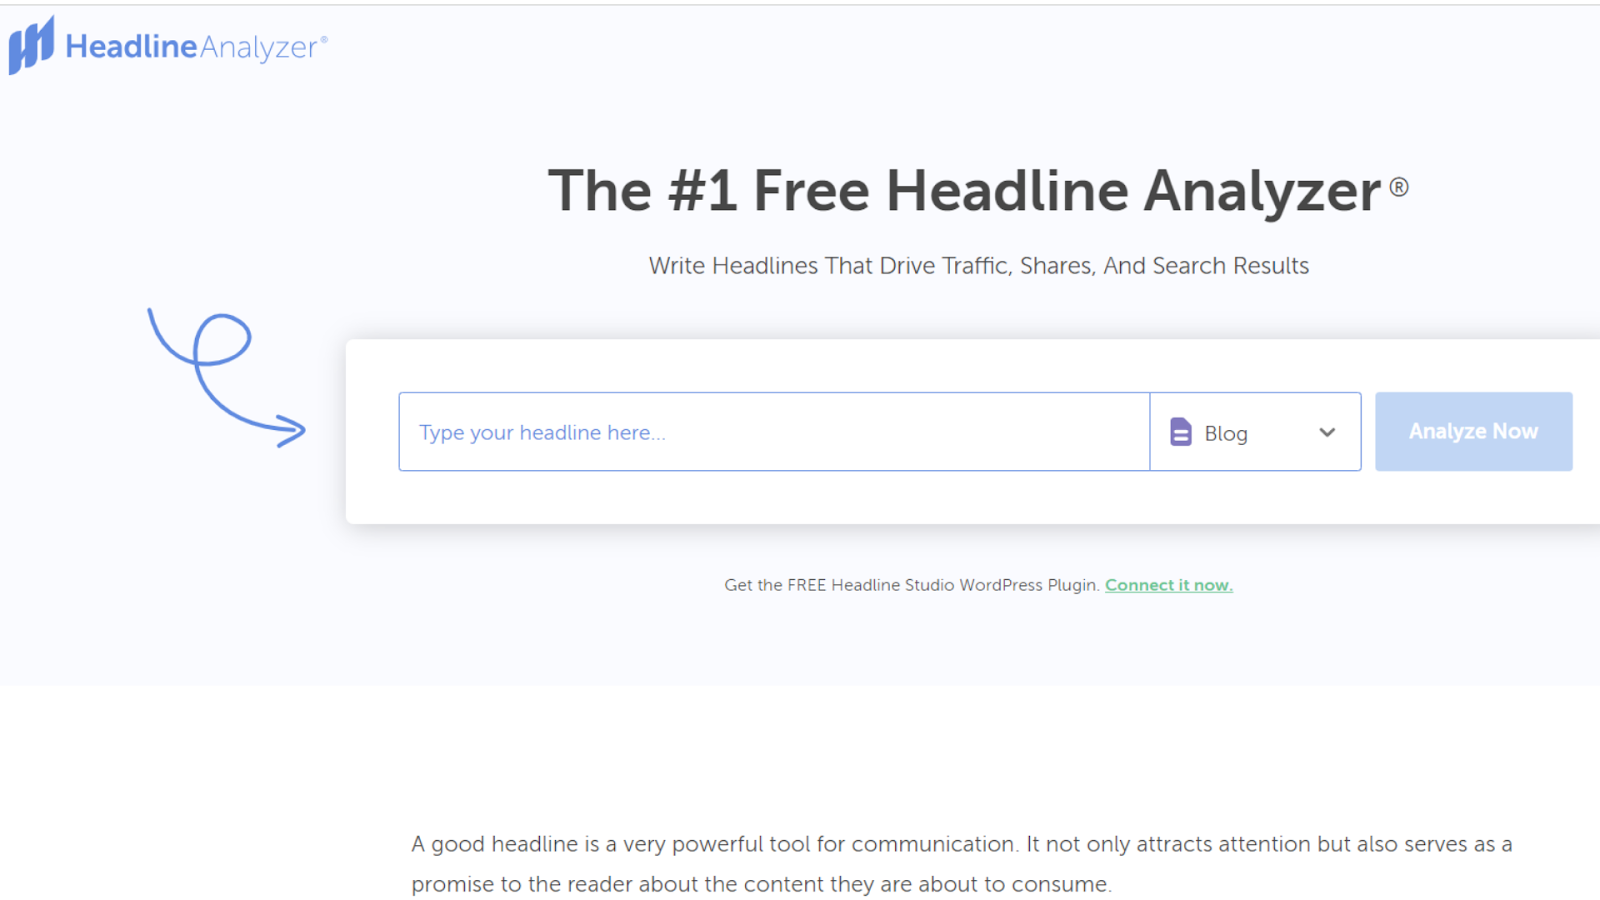 5. CoSchedule Headline Analyzer: AI TOOLS FOR TWITTER